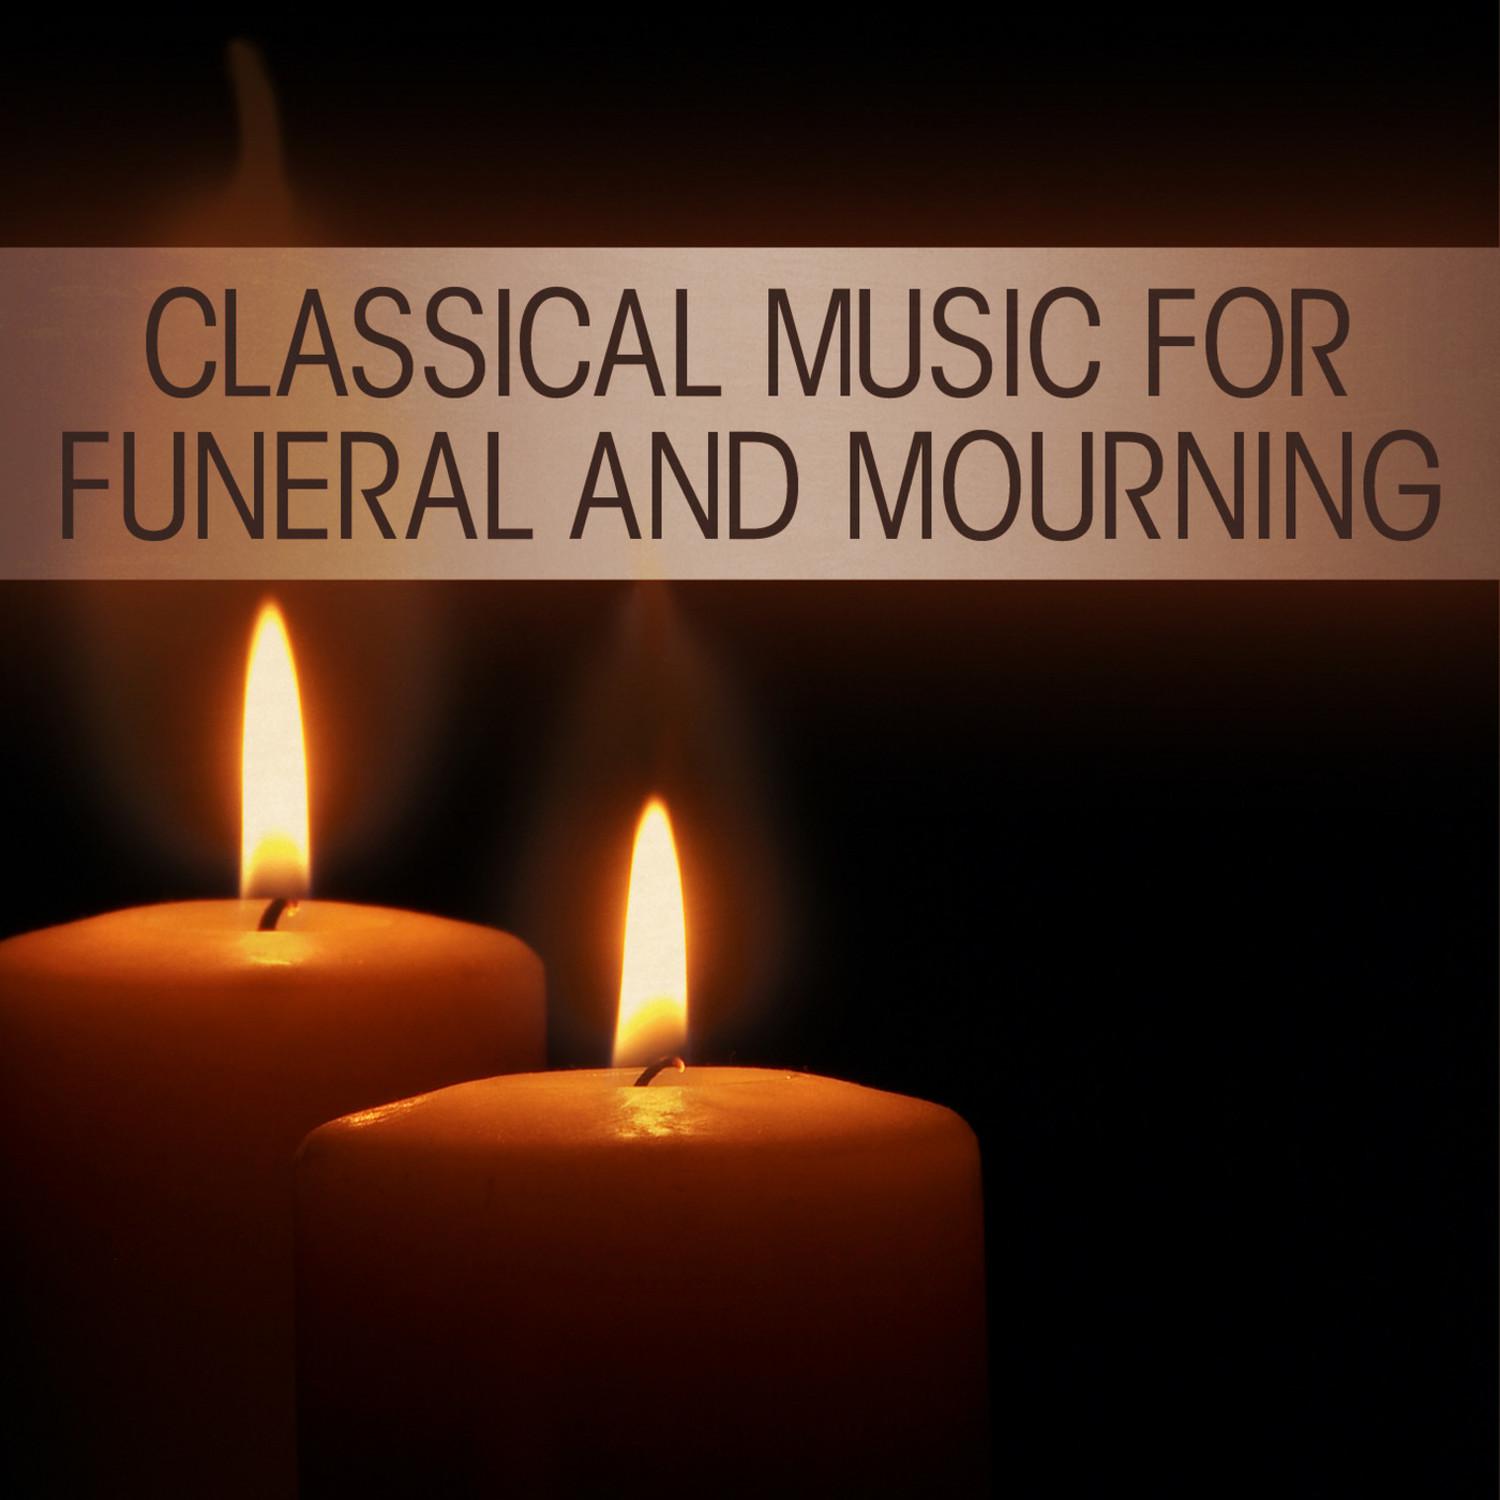 Classical Music for Funeral and Mourning